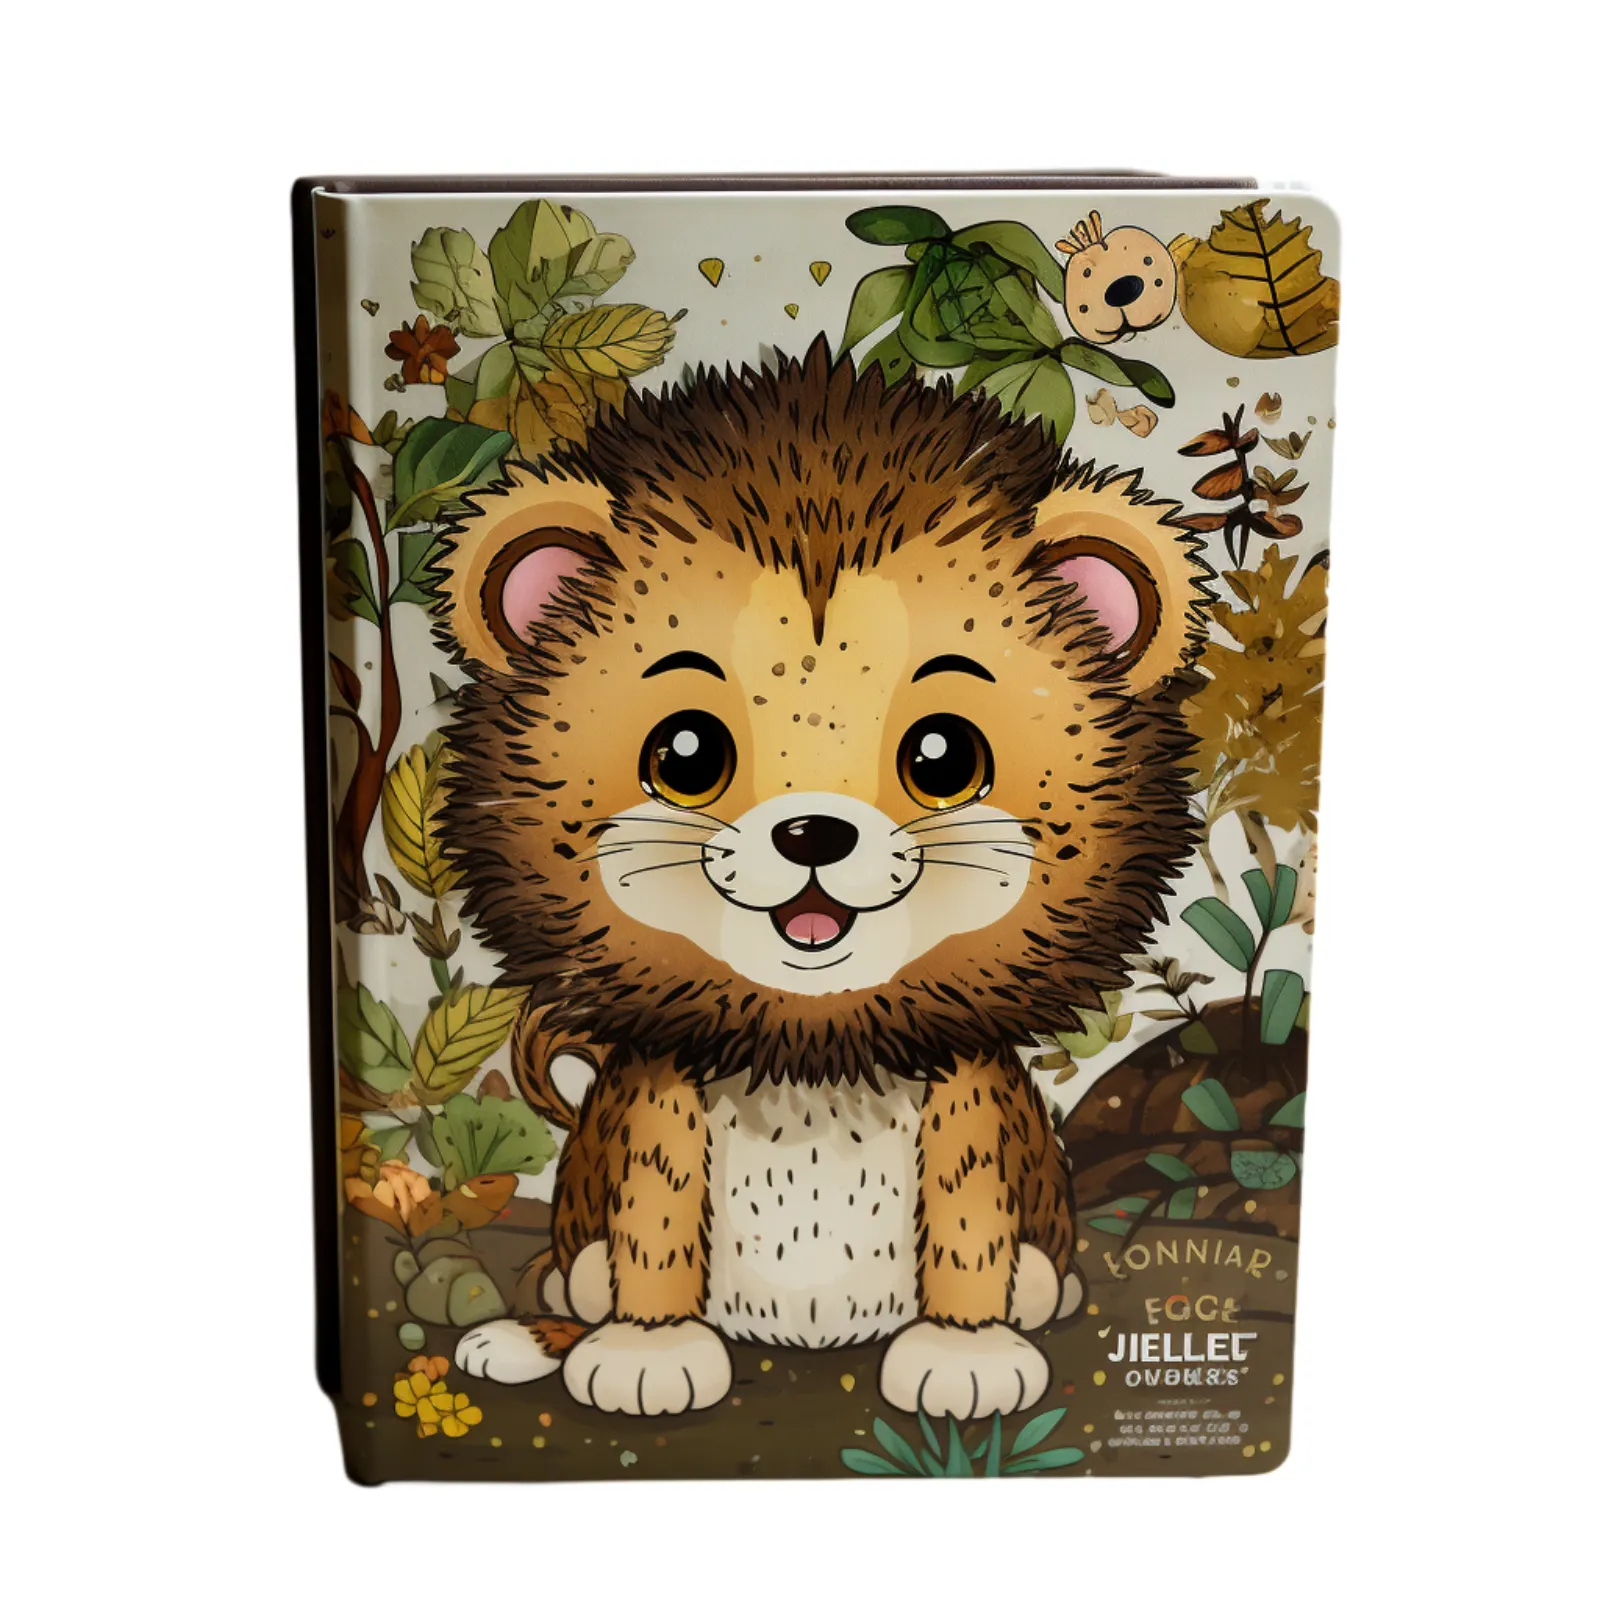 High Quality Children Hard Cover Books Printing The Contents Can Be Written Down In A Note Book